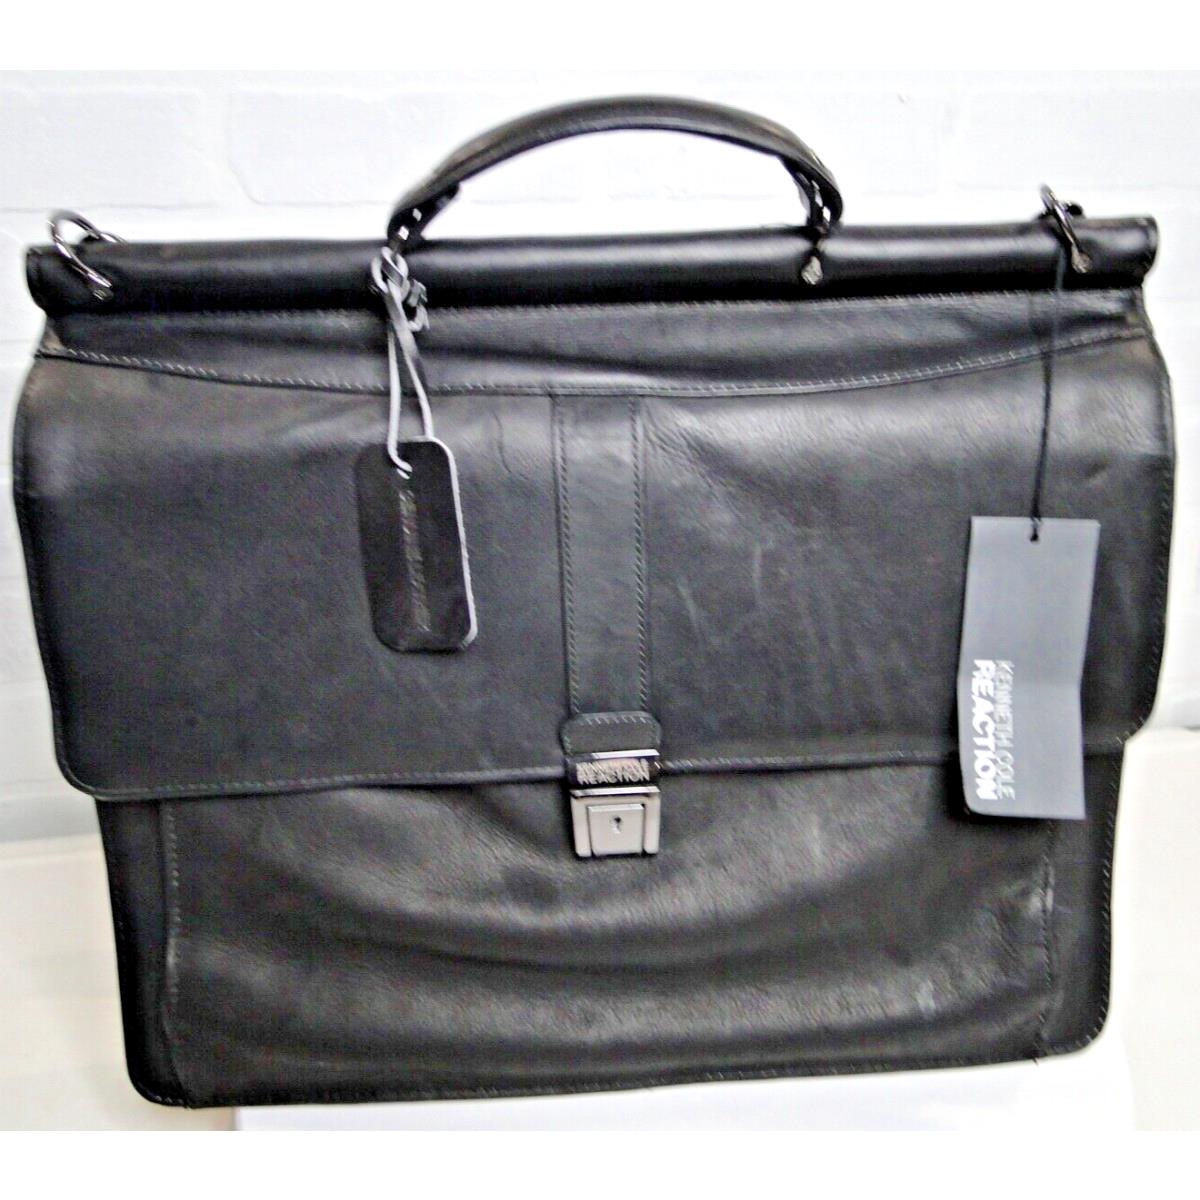 Kenneth Cole Reaction Black Leather Briefcase / Strap Key